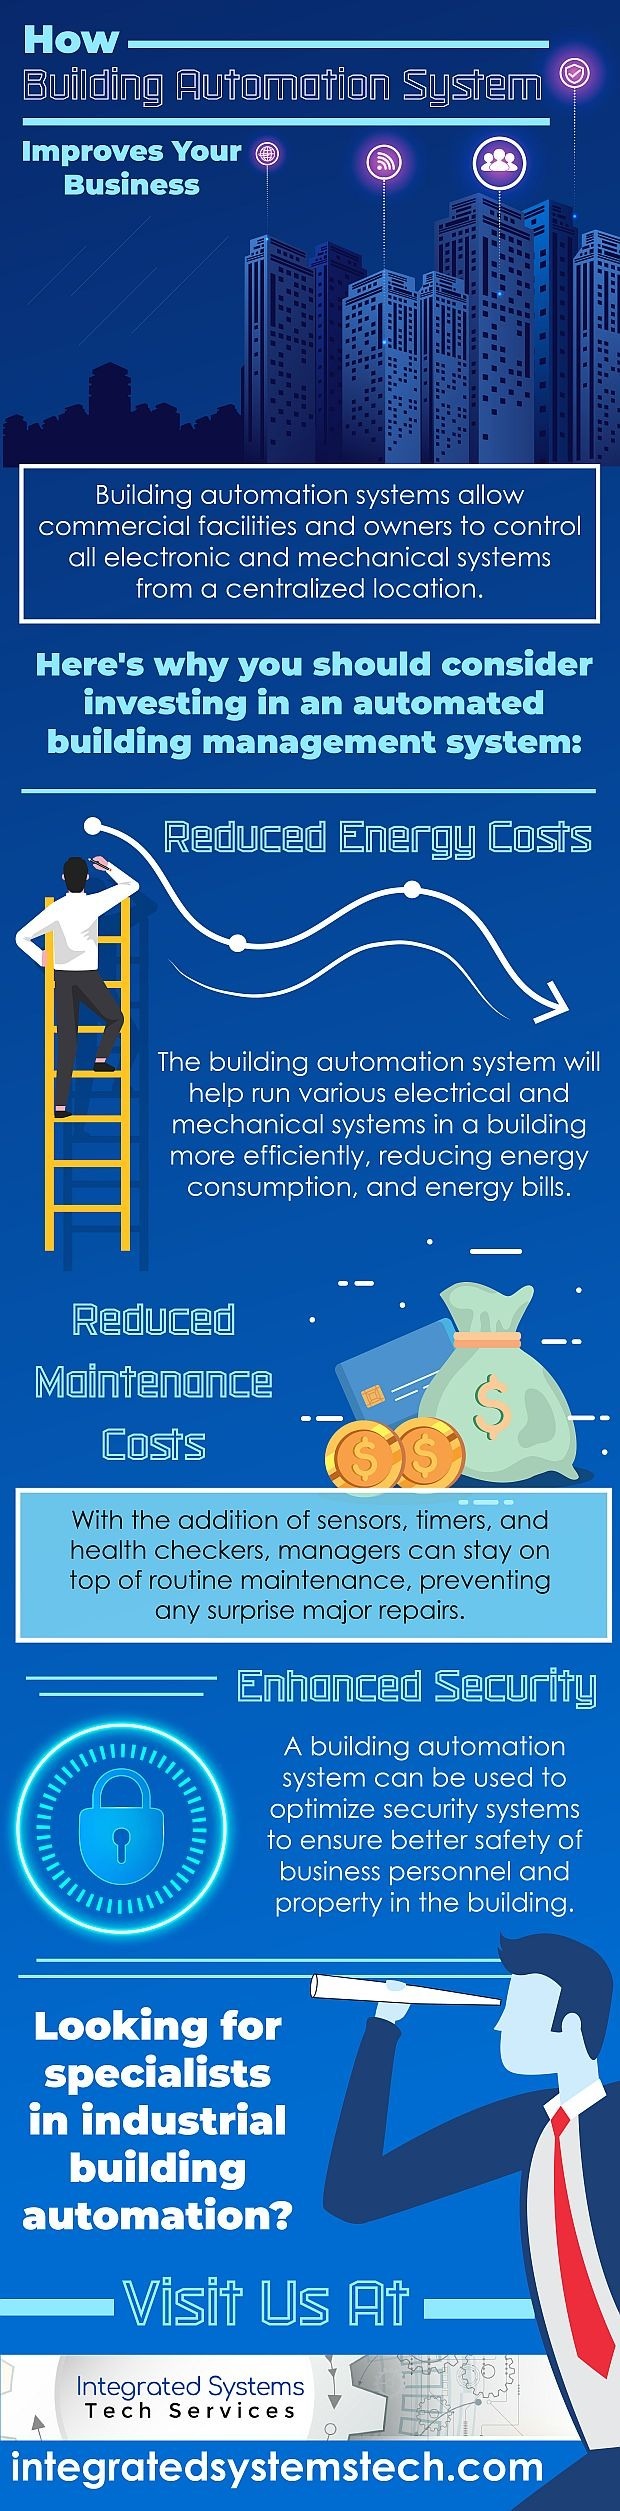 Building Automation Systems - Infographic